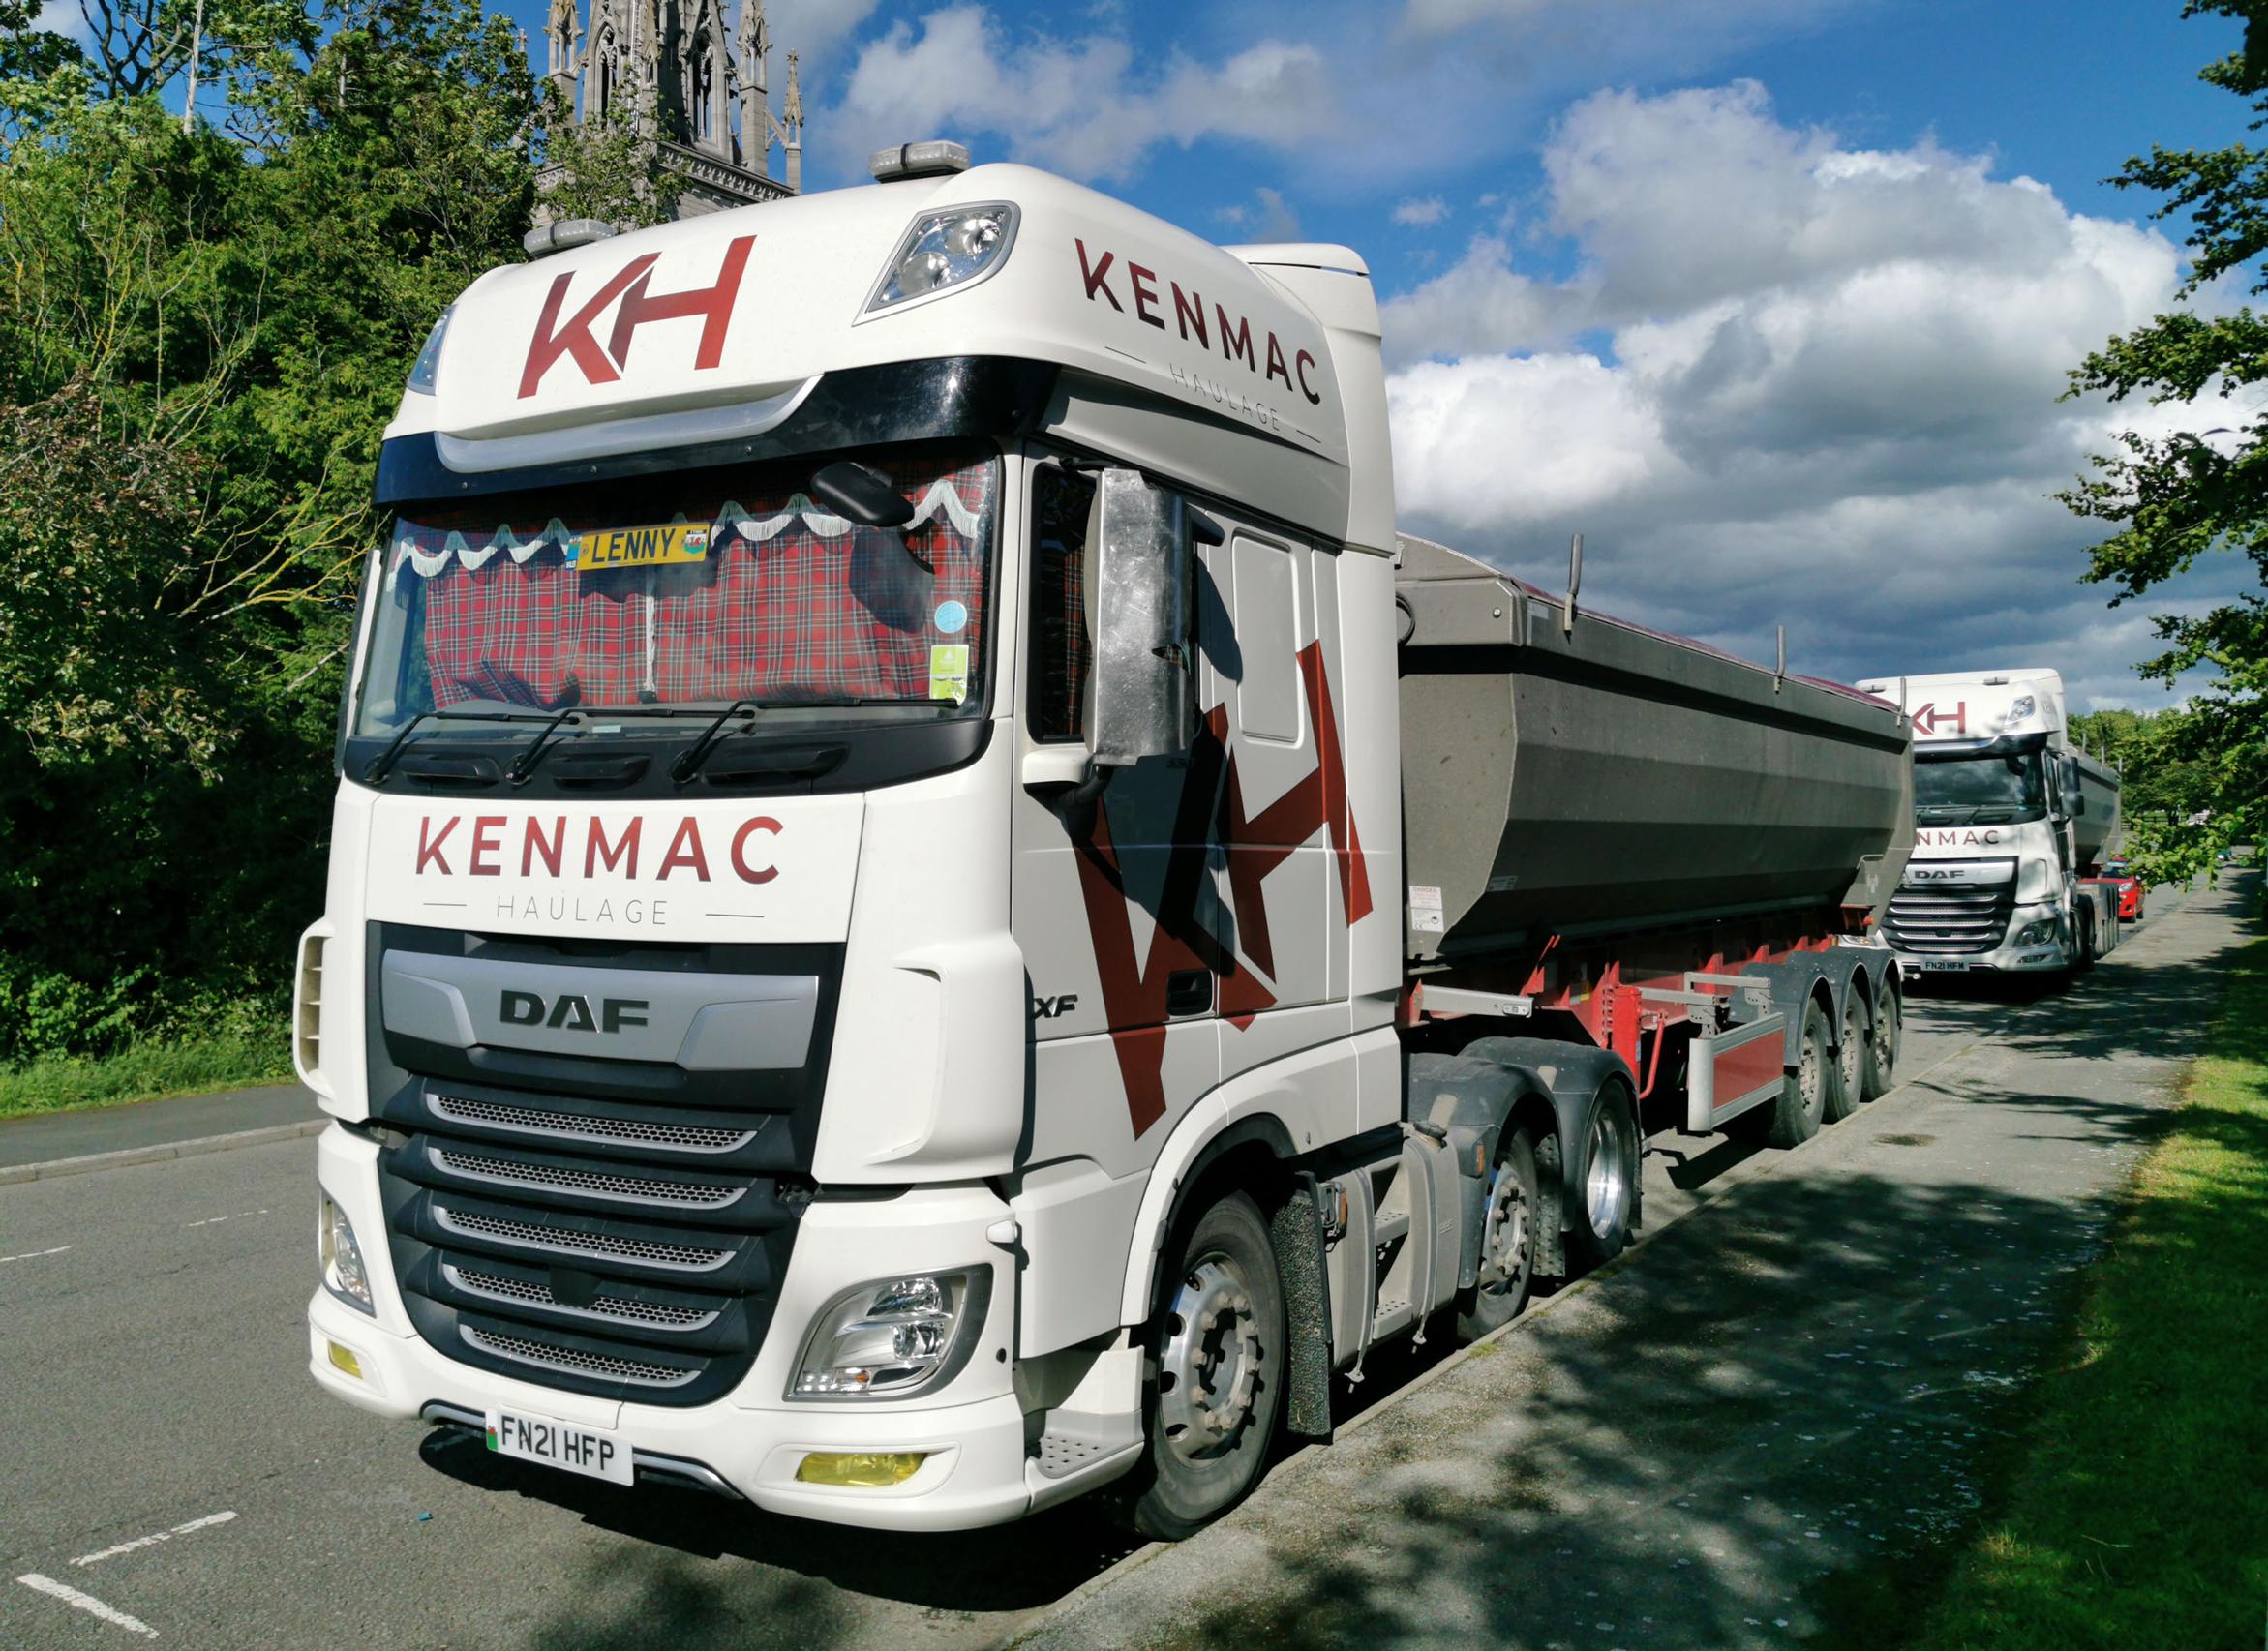 Inadequate rest areas for freight drivers result in HGVs parking on roadsides and in lay-bys. The nearside front wheels of these vehicles, parked near the A55 in North Wales, are resting on kerbstones to make the beds inside the cabs level.